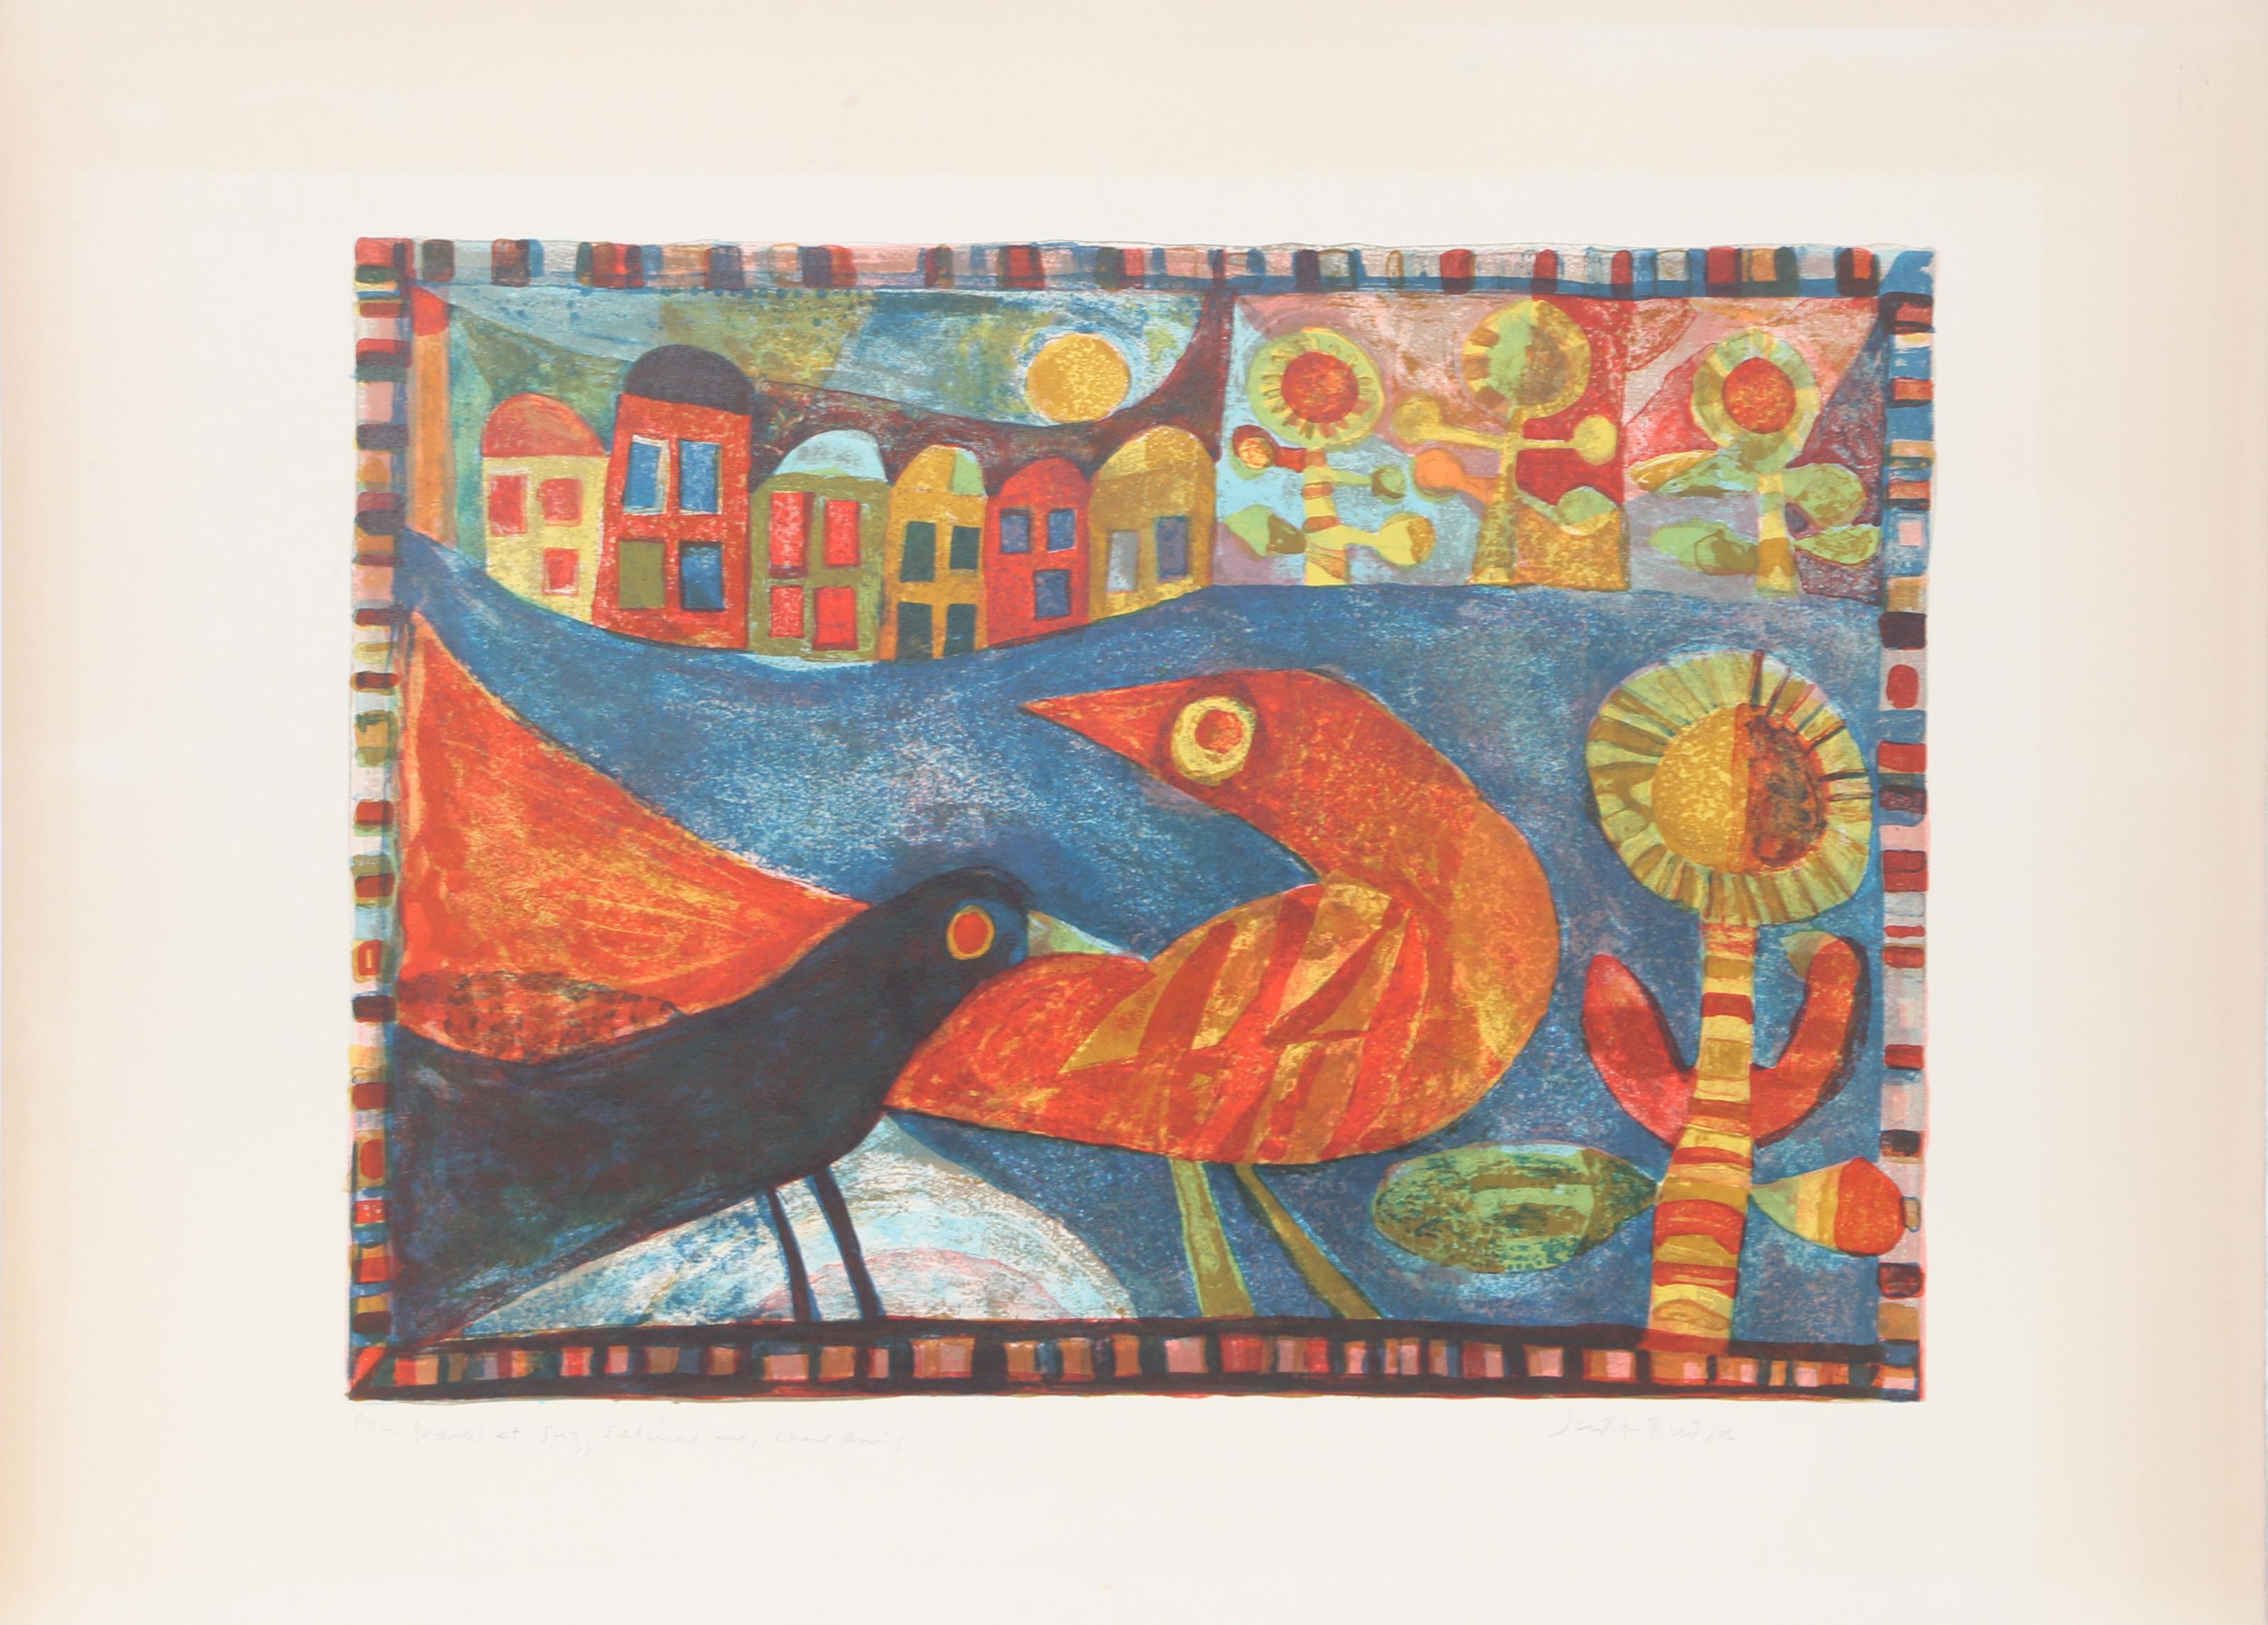 Judith Bledsoe, American (1938 - 2013) -  Red Bird and Crow. Year: circa 1970, Medium: Lithograph, signed and dedicated in pencil, Edition: EA, Image Size: 15 x 21 inches, Size: 22 x 30 in. (55.88 x 76.2 cm), Description: Curling its head backward